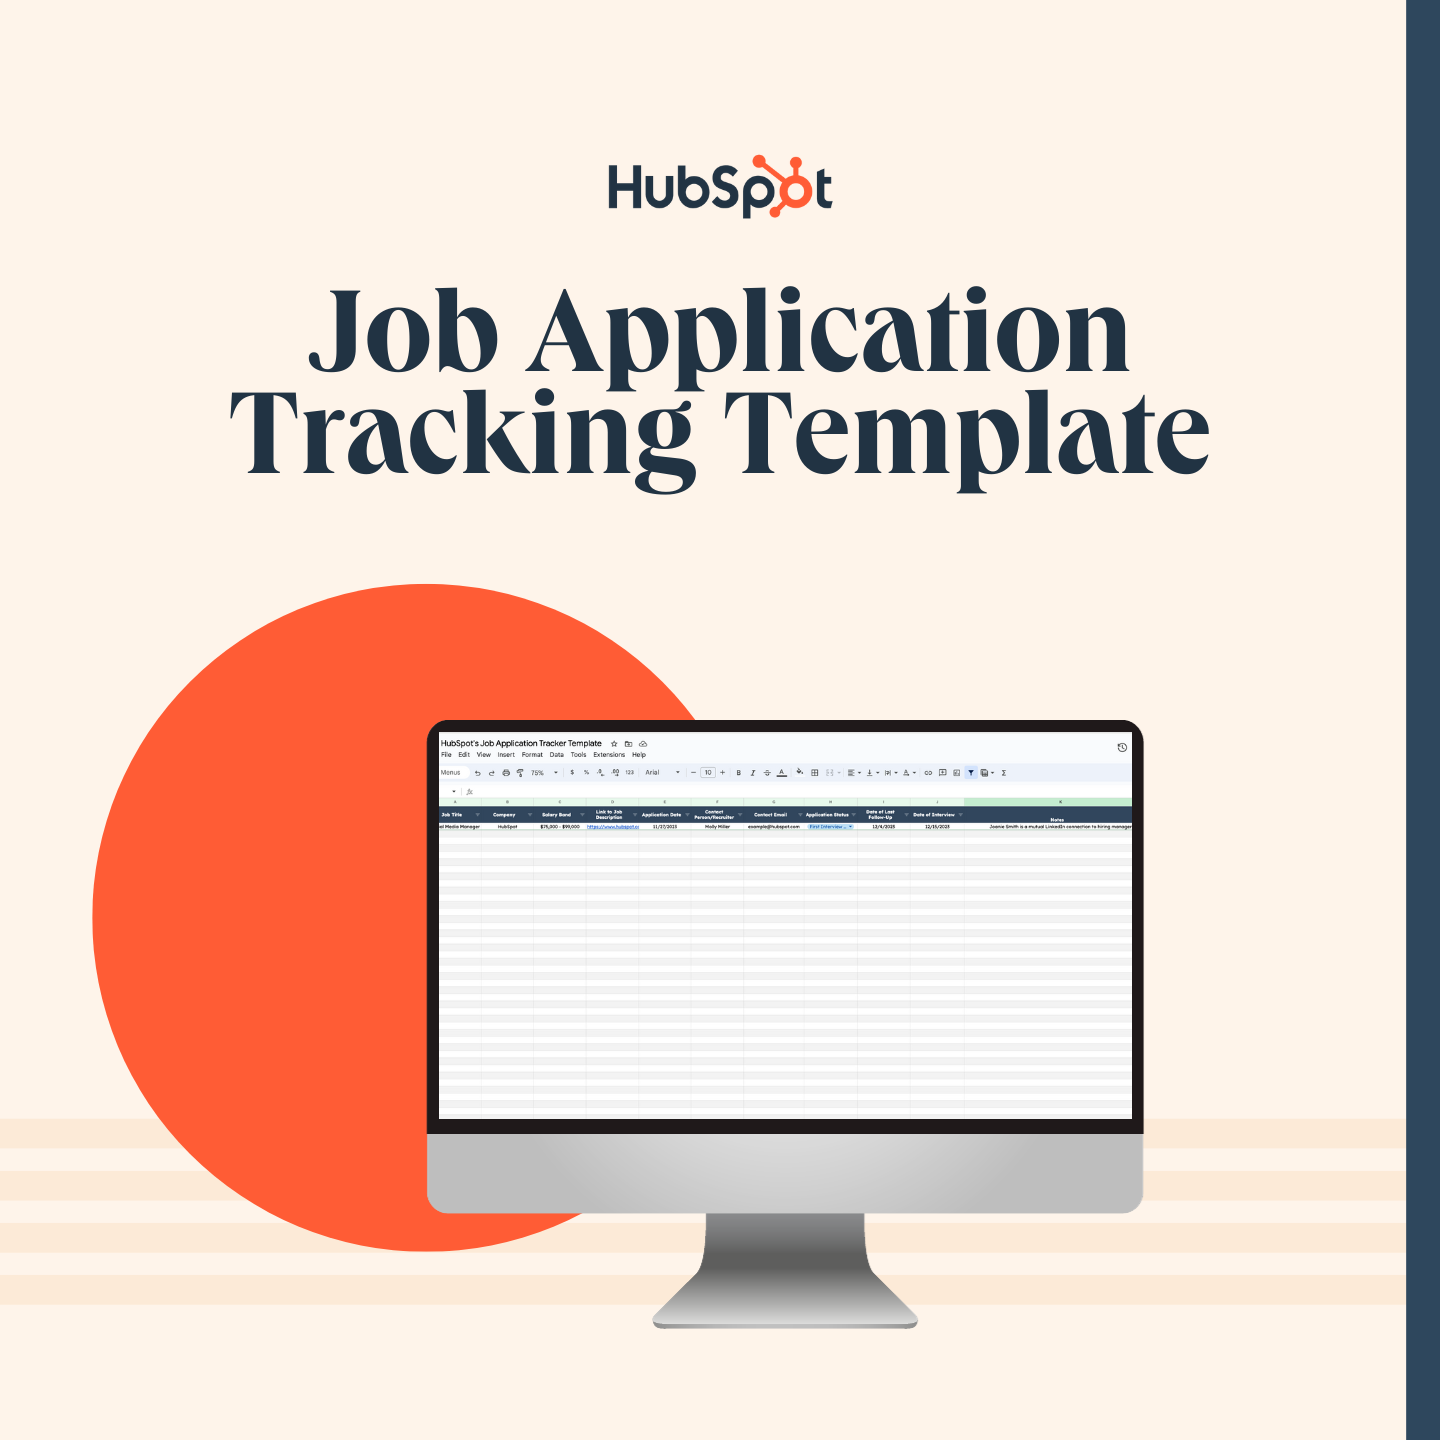 Feat Image - Job Application Tracking Template